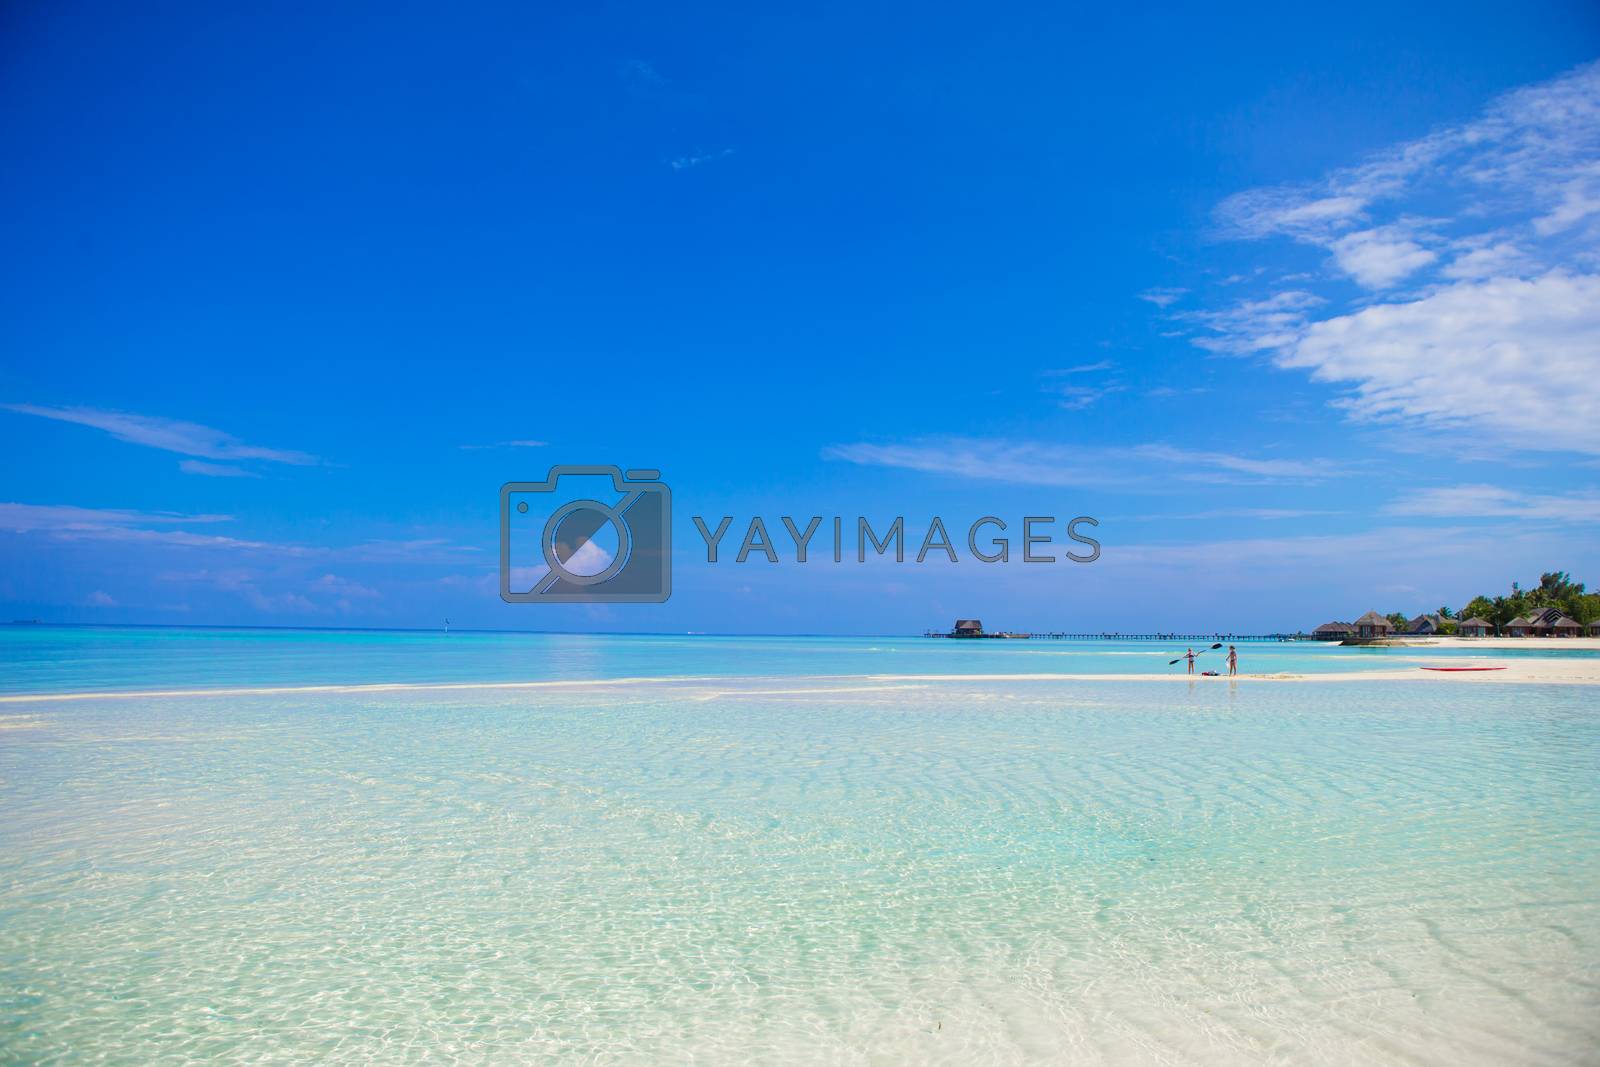 Royalty free image of Idyllic tropical beach with white sand and perfect turquoise water by travnikovstudio